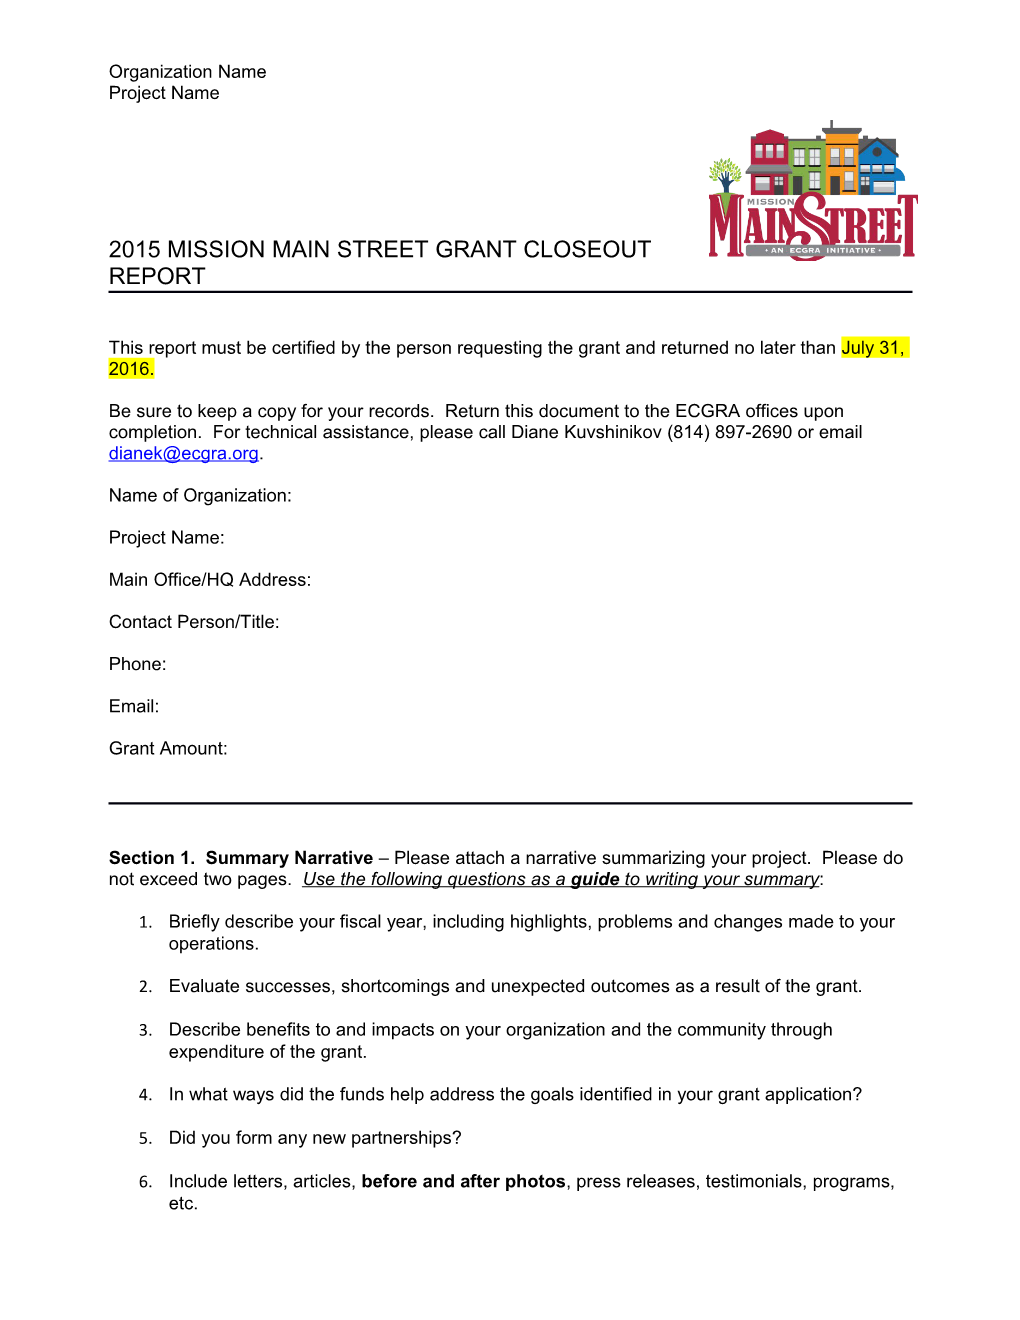 2015Mission Main Street Grant Closeout Report